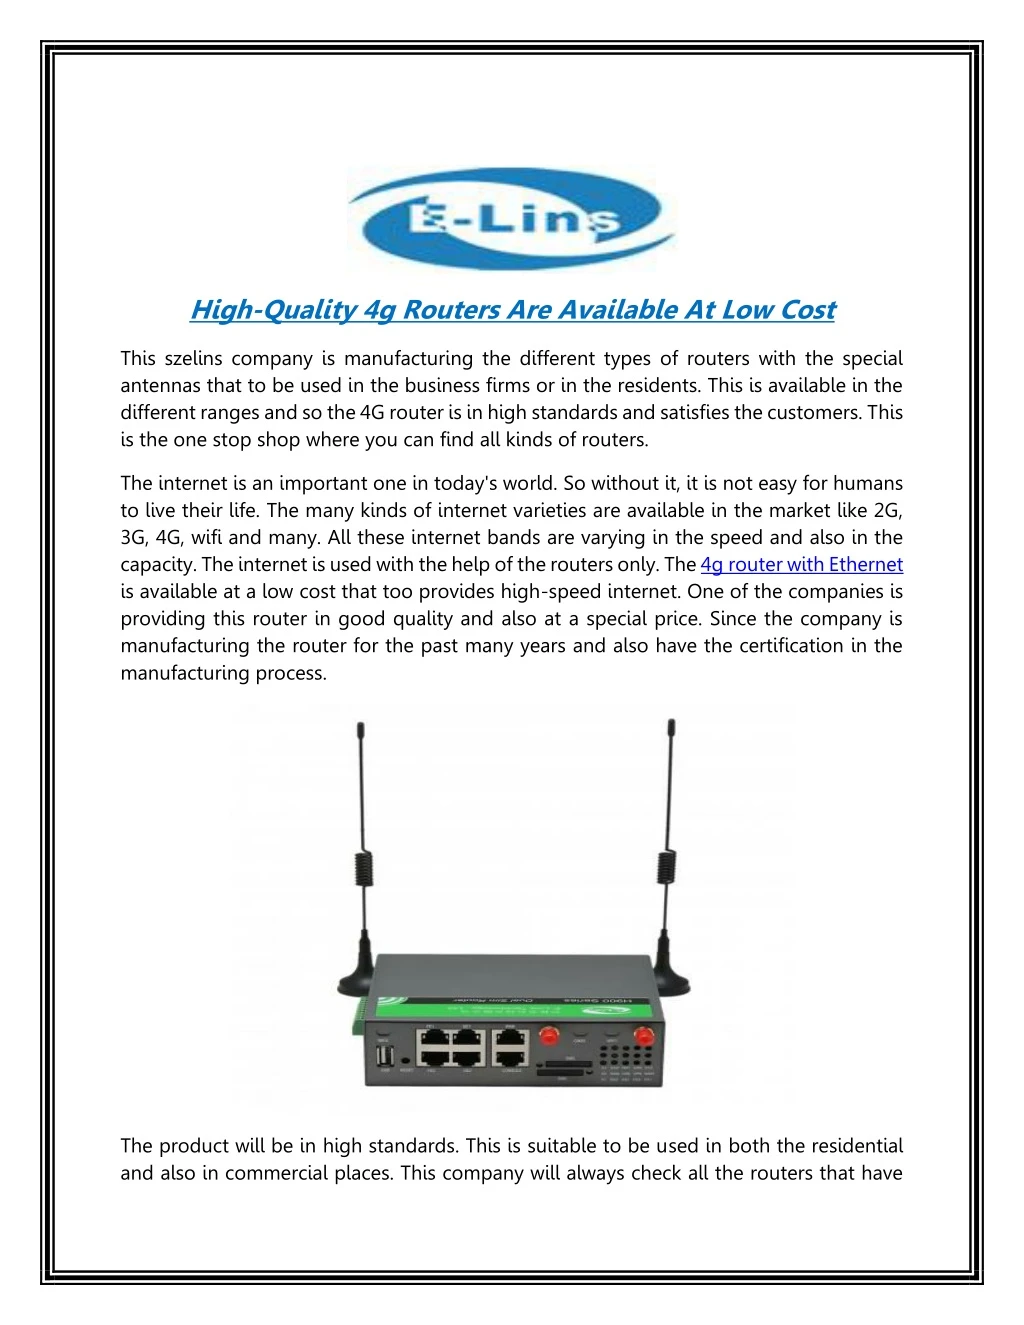 high quality 4g routers are available at low cost